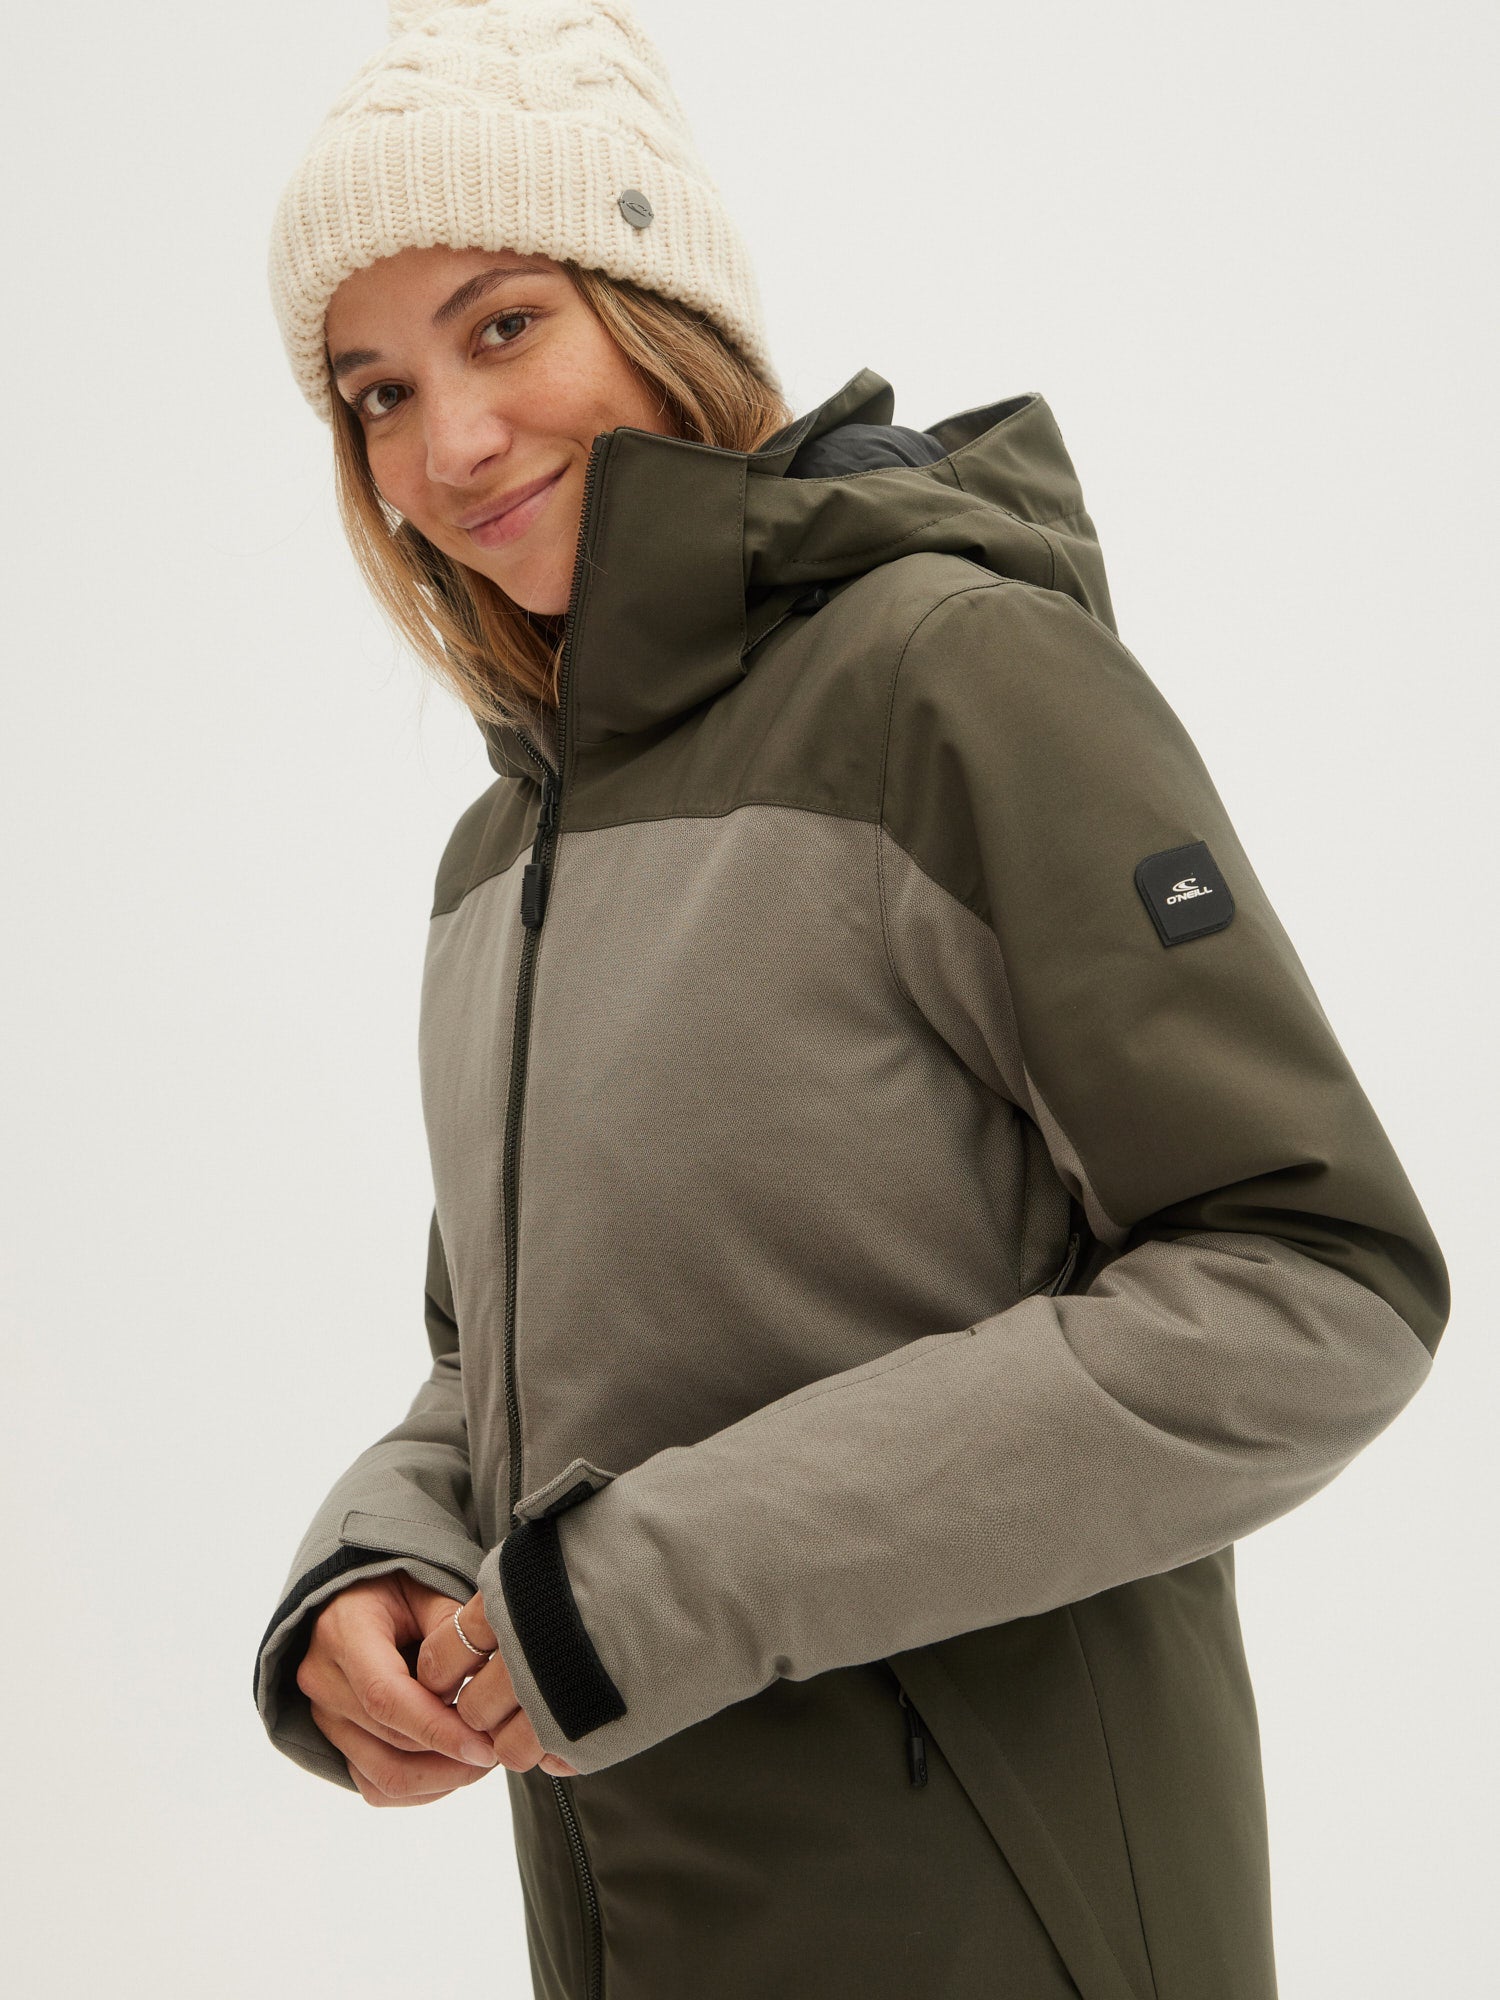 O'Neill Ladies Halo Jacket in Army Green